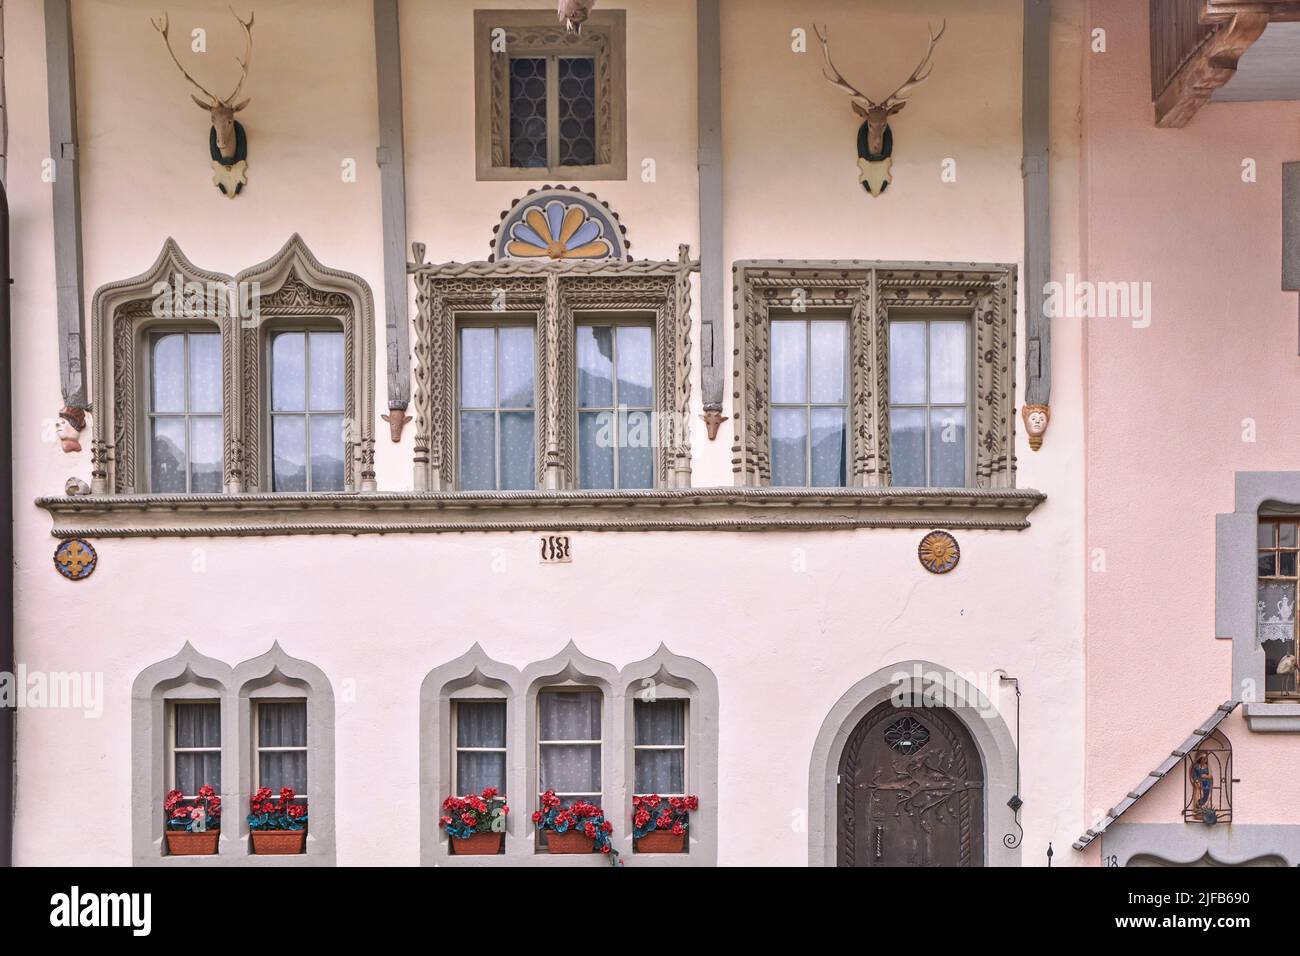 Switzerland, Canton of Friborg, Gruyères, medieval city, house facade with deer trophies Stock Photo